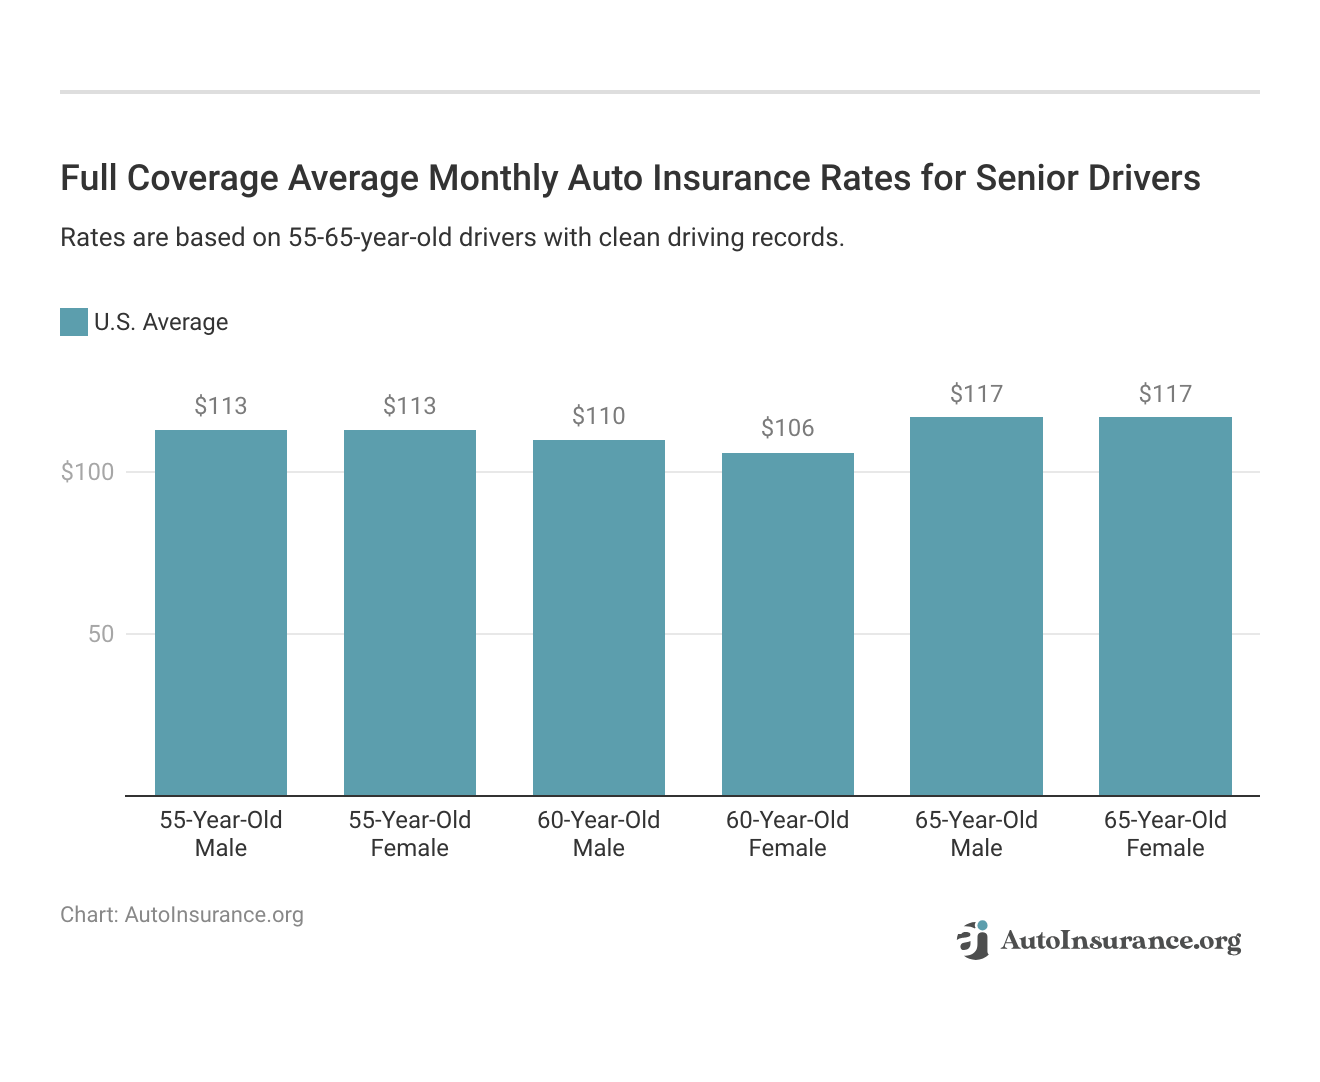 <h3>Full Coverage Average Monthly Auto Insurance Rates for Senior Drivers</h3>